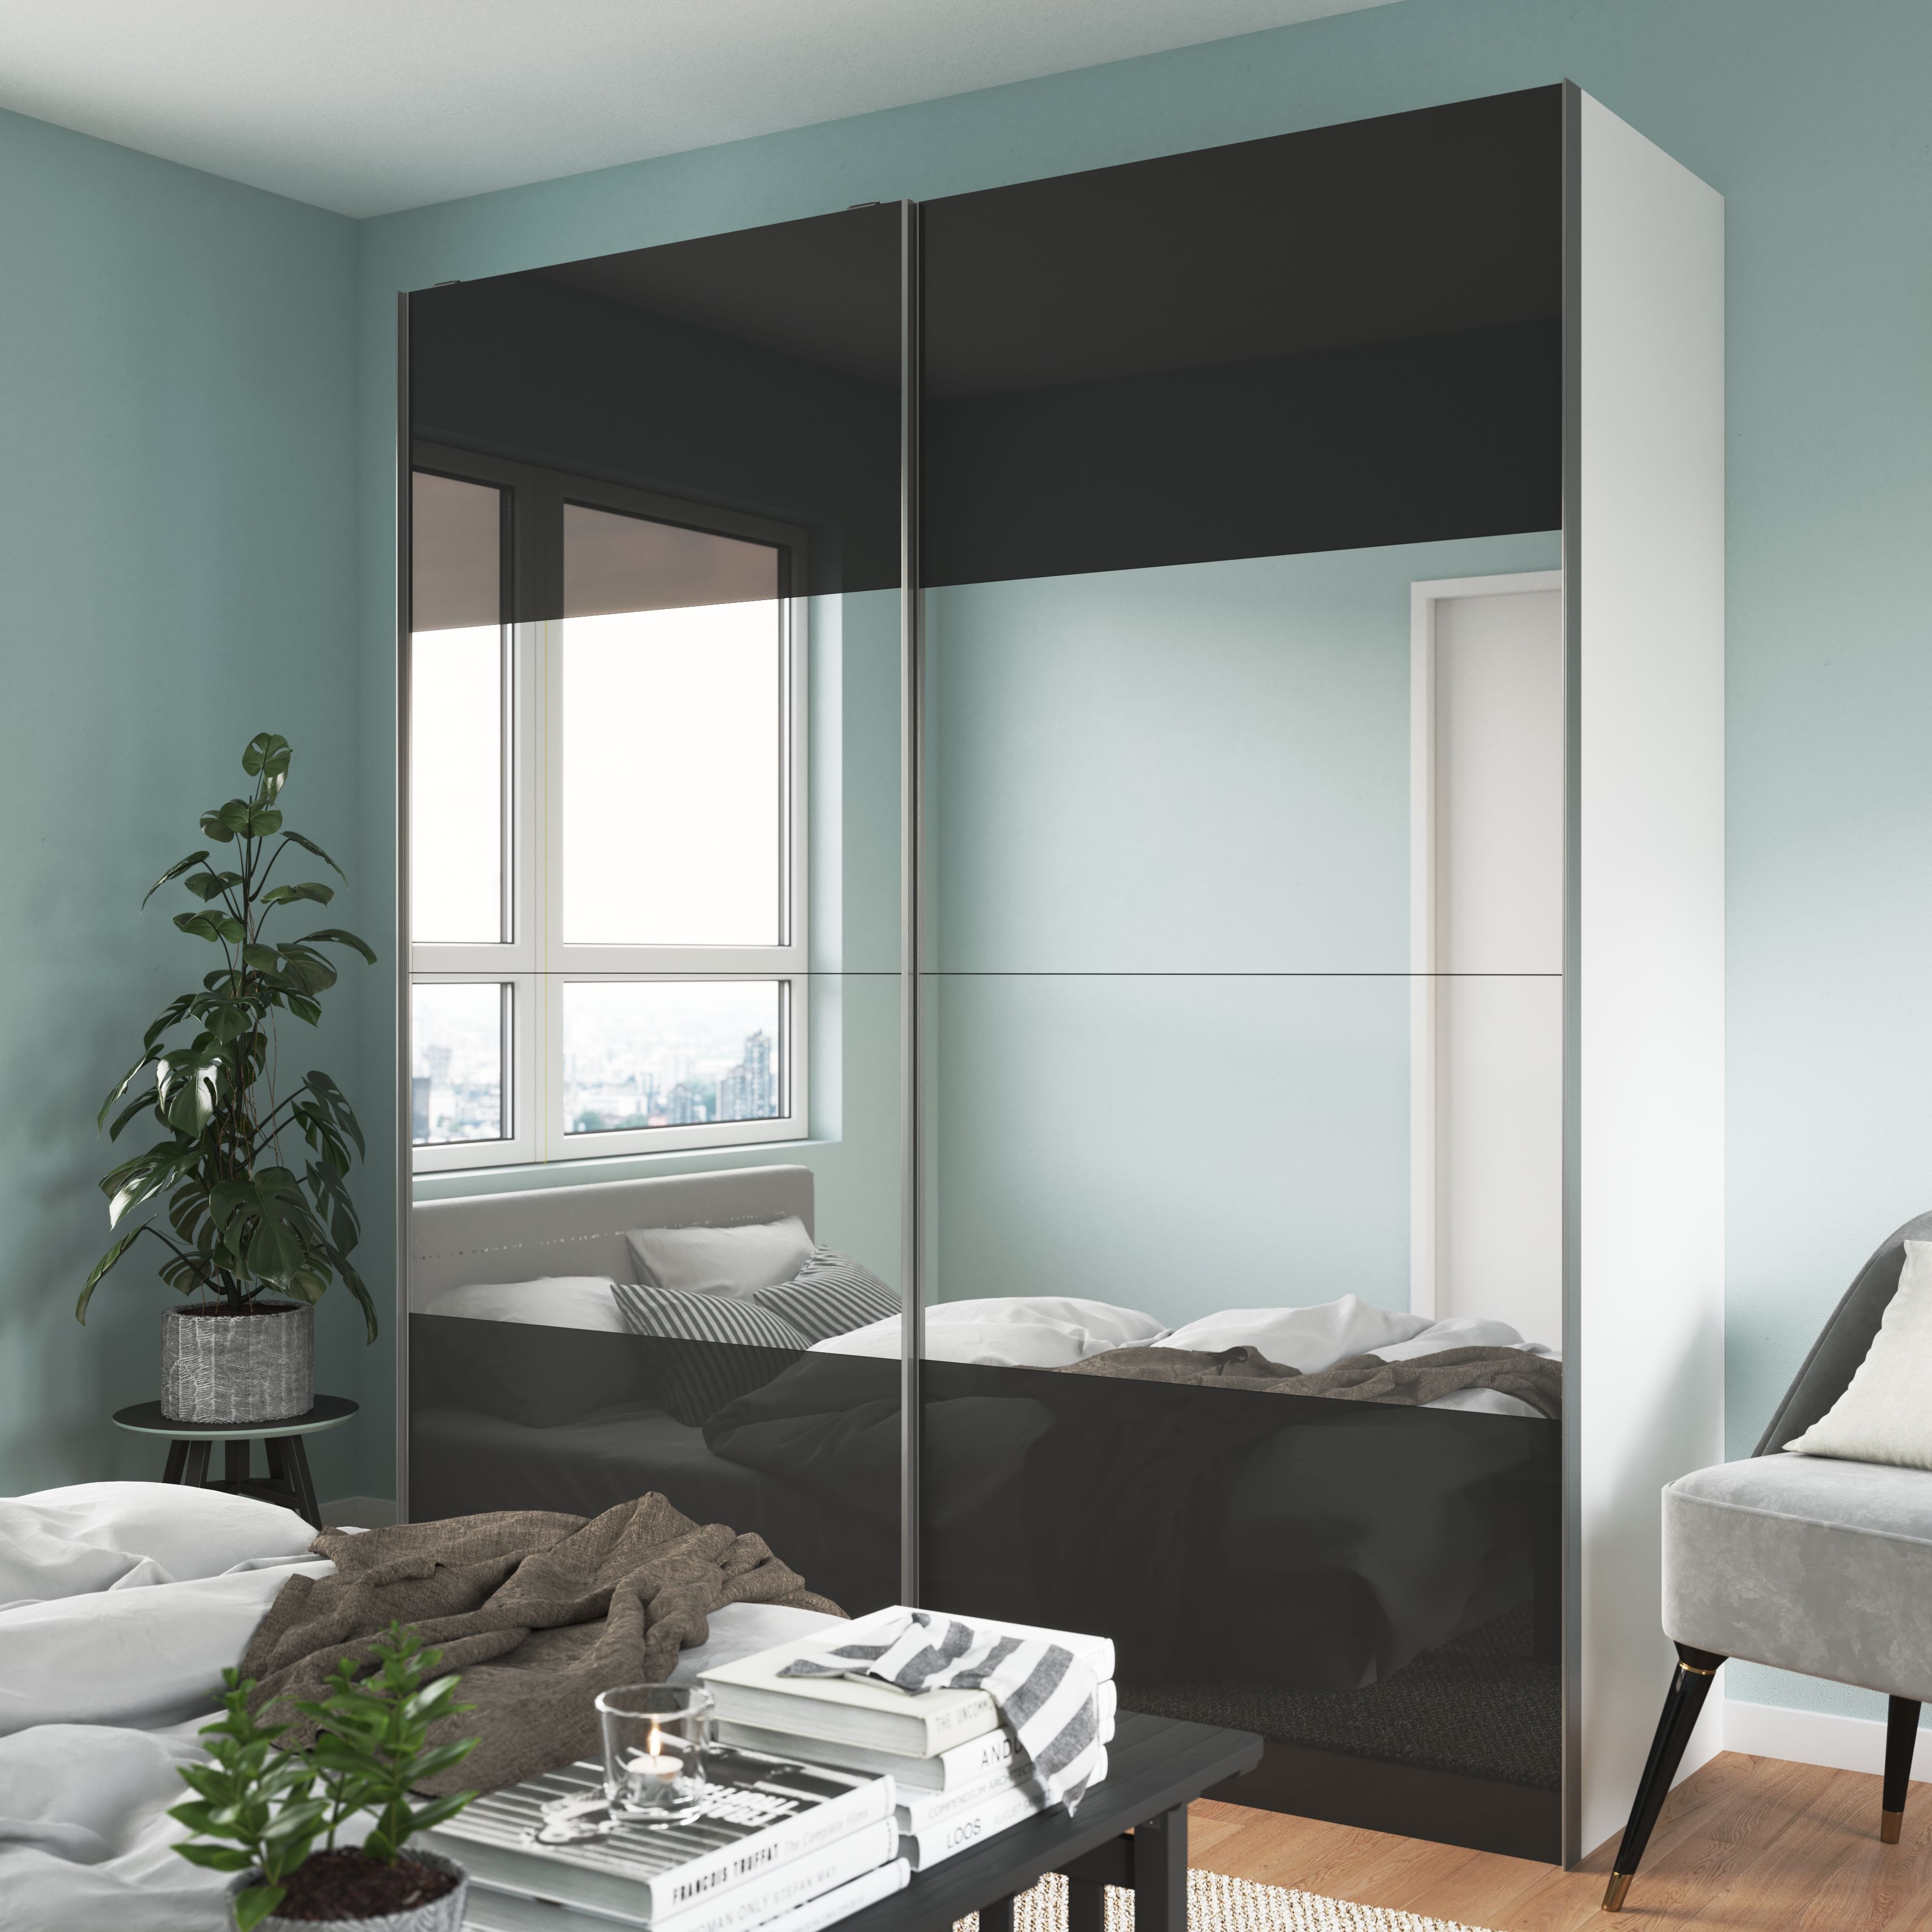 GoodHome Atomia Gloss Anthracite Sliding wardrobe door (H) 560mm x (W) 737mm, Pack of 4